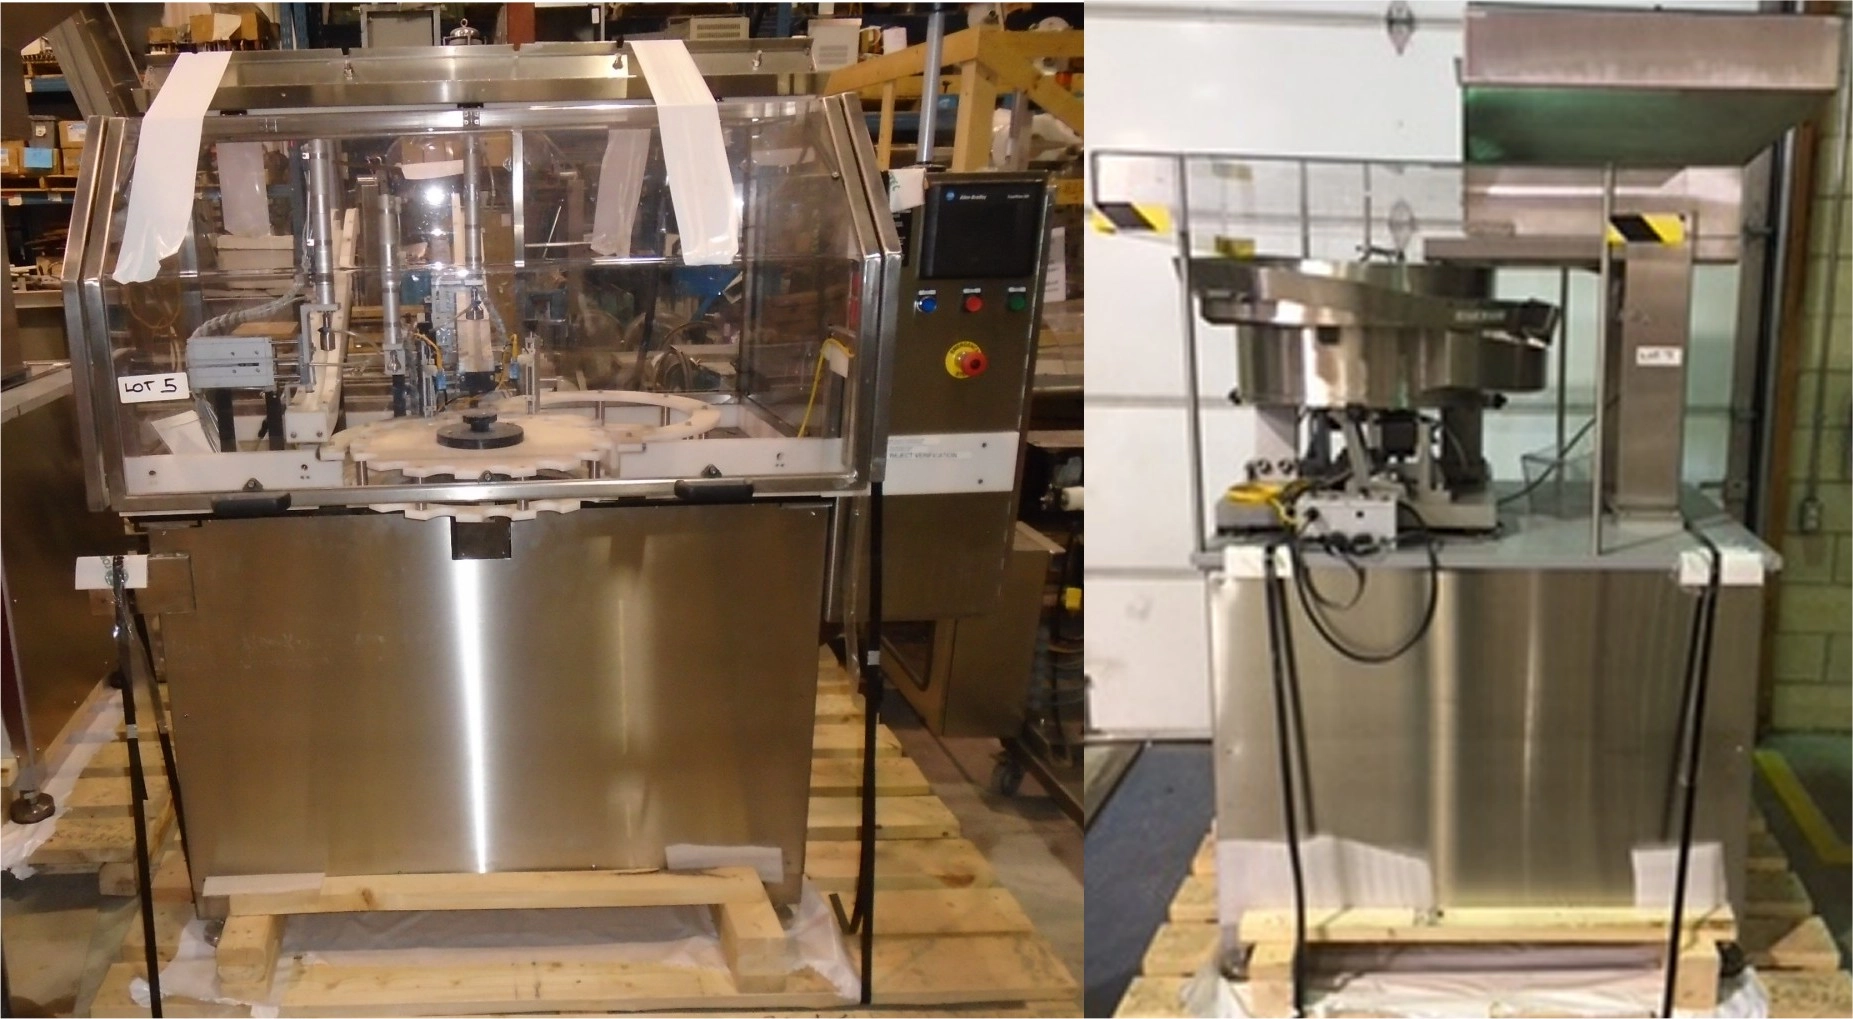 Unused Integrated Packaging Capper PA-001 with Unused Crown Stainless Steel Sorting Feeder for pumps or Caps Model 24CW